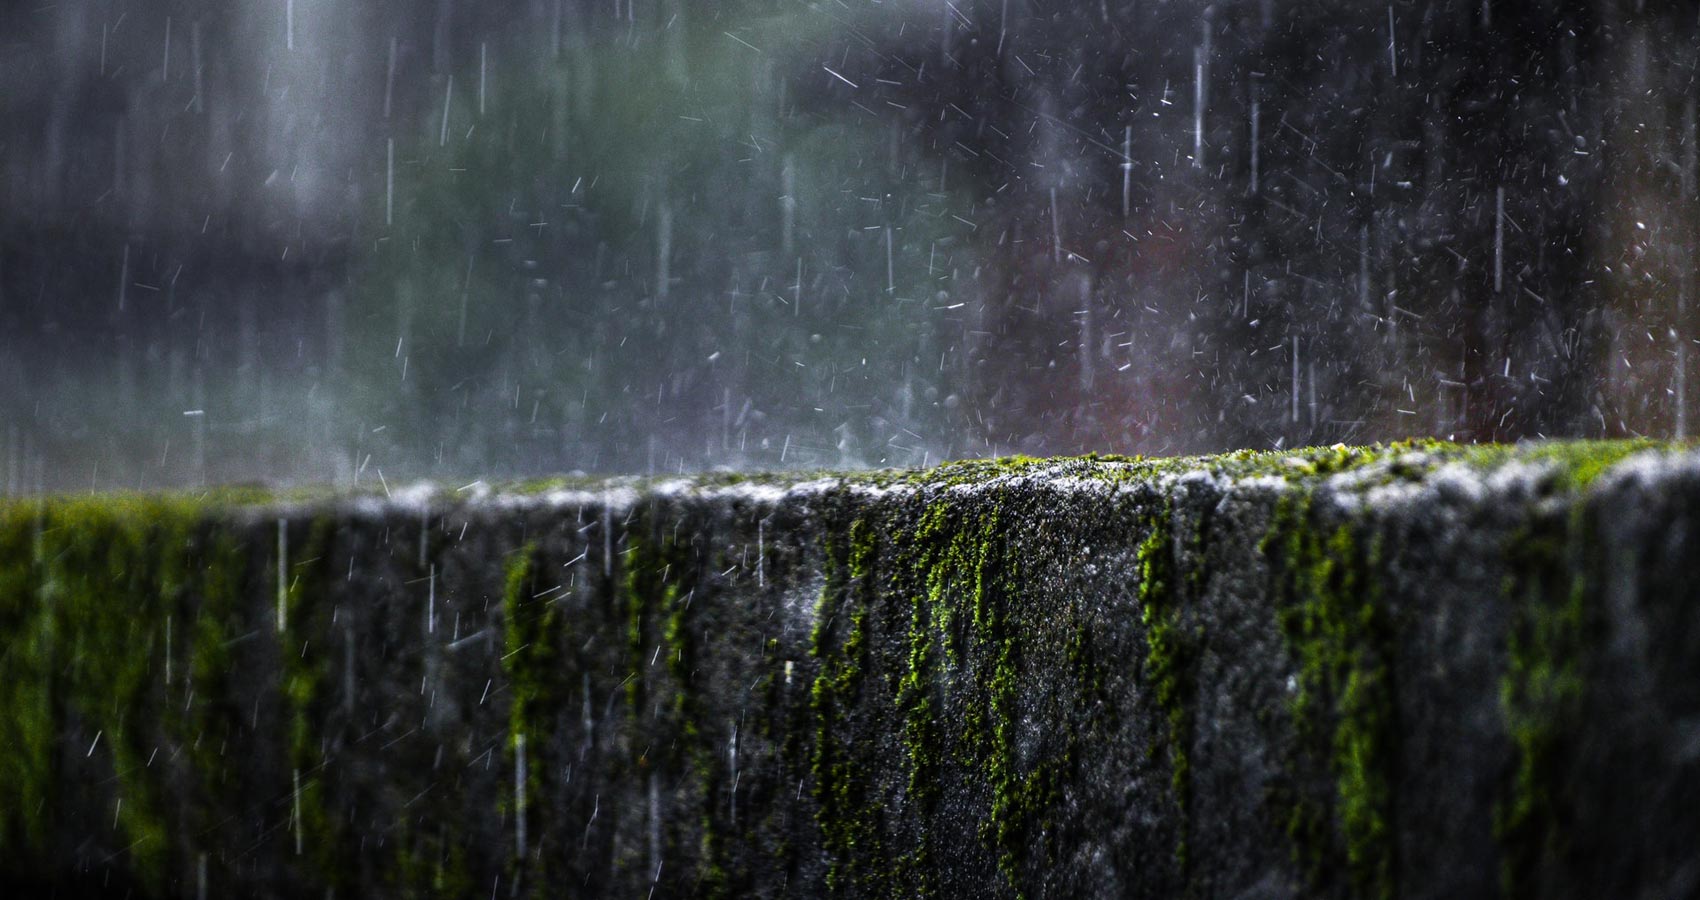 Song of The Rain VII, a poem by Khalil Gibran at Spillwords.com